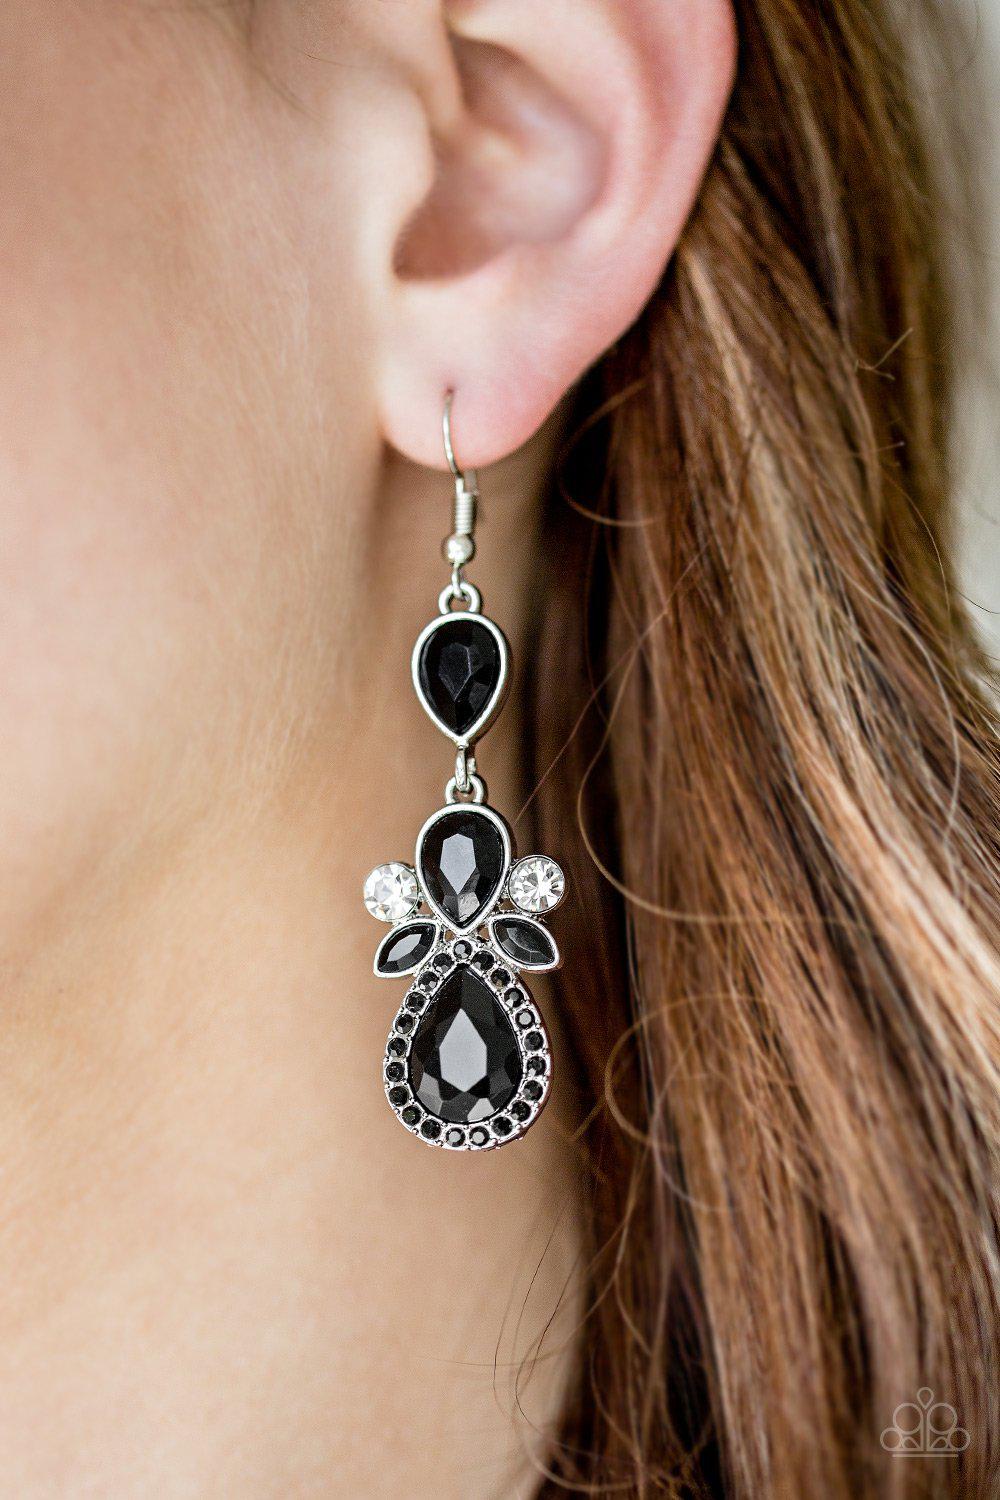 All About Glam Black Earrings - Paparazzi Accessories-CarasShop.com - $5 Jewelry by Cara Jewels